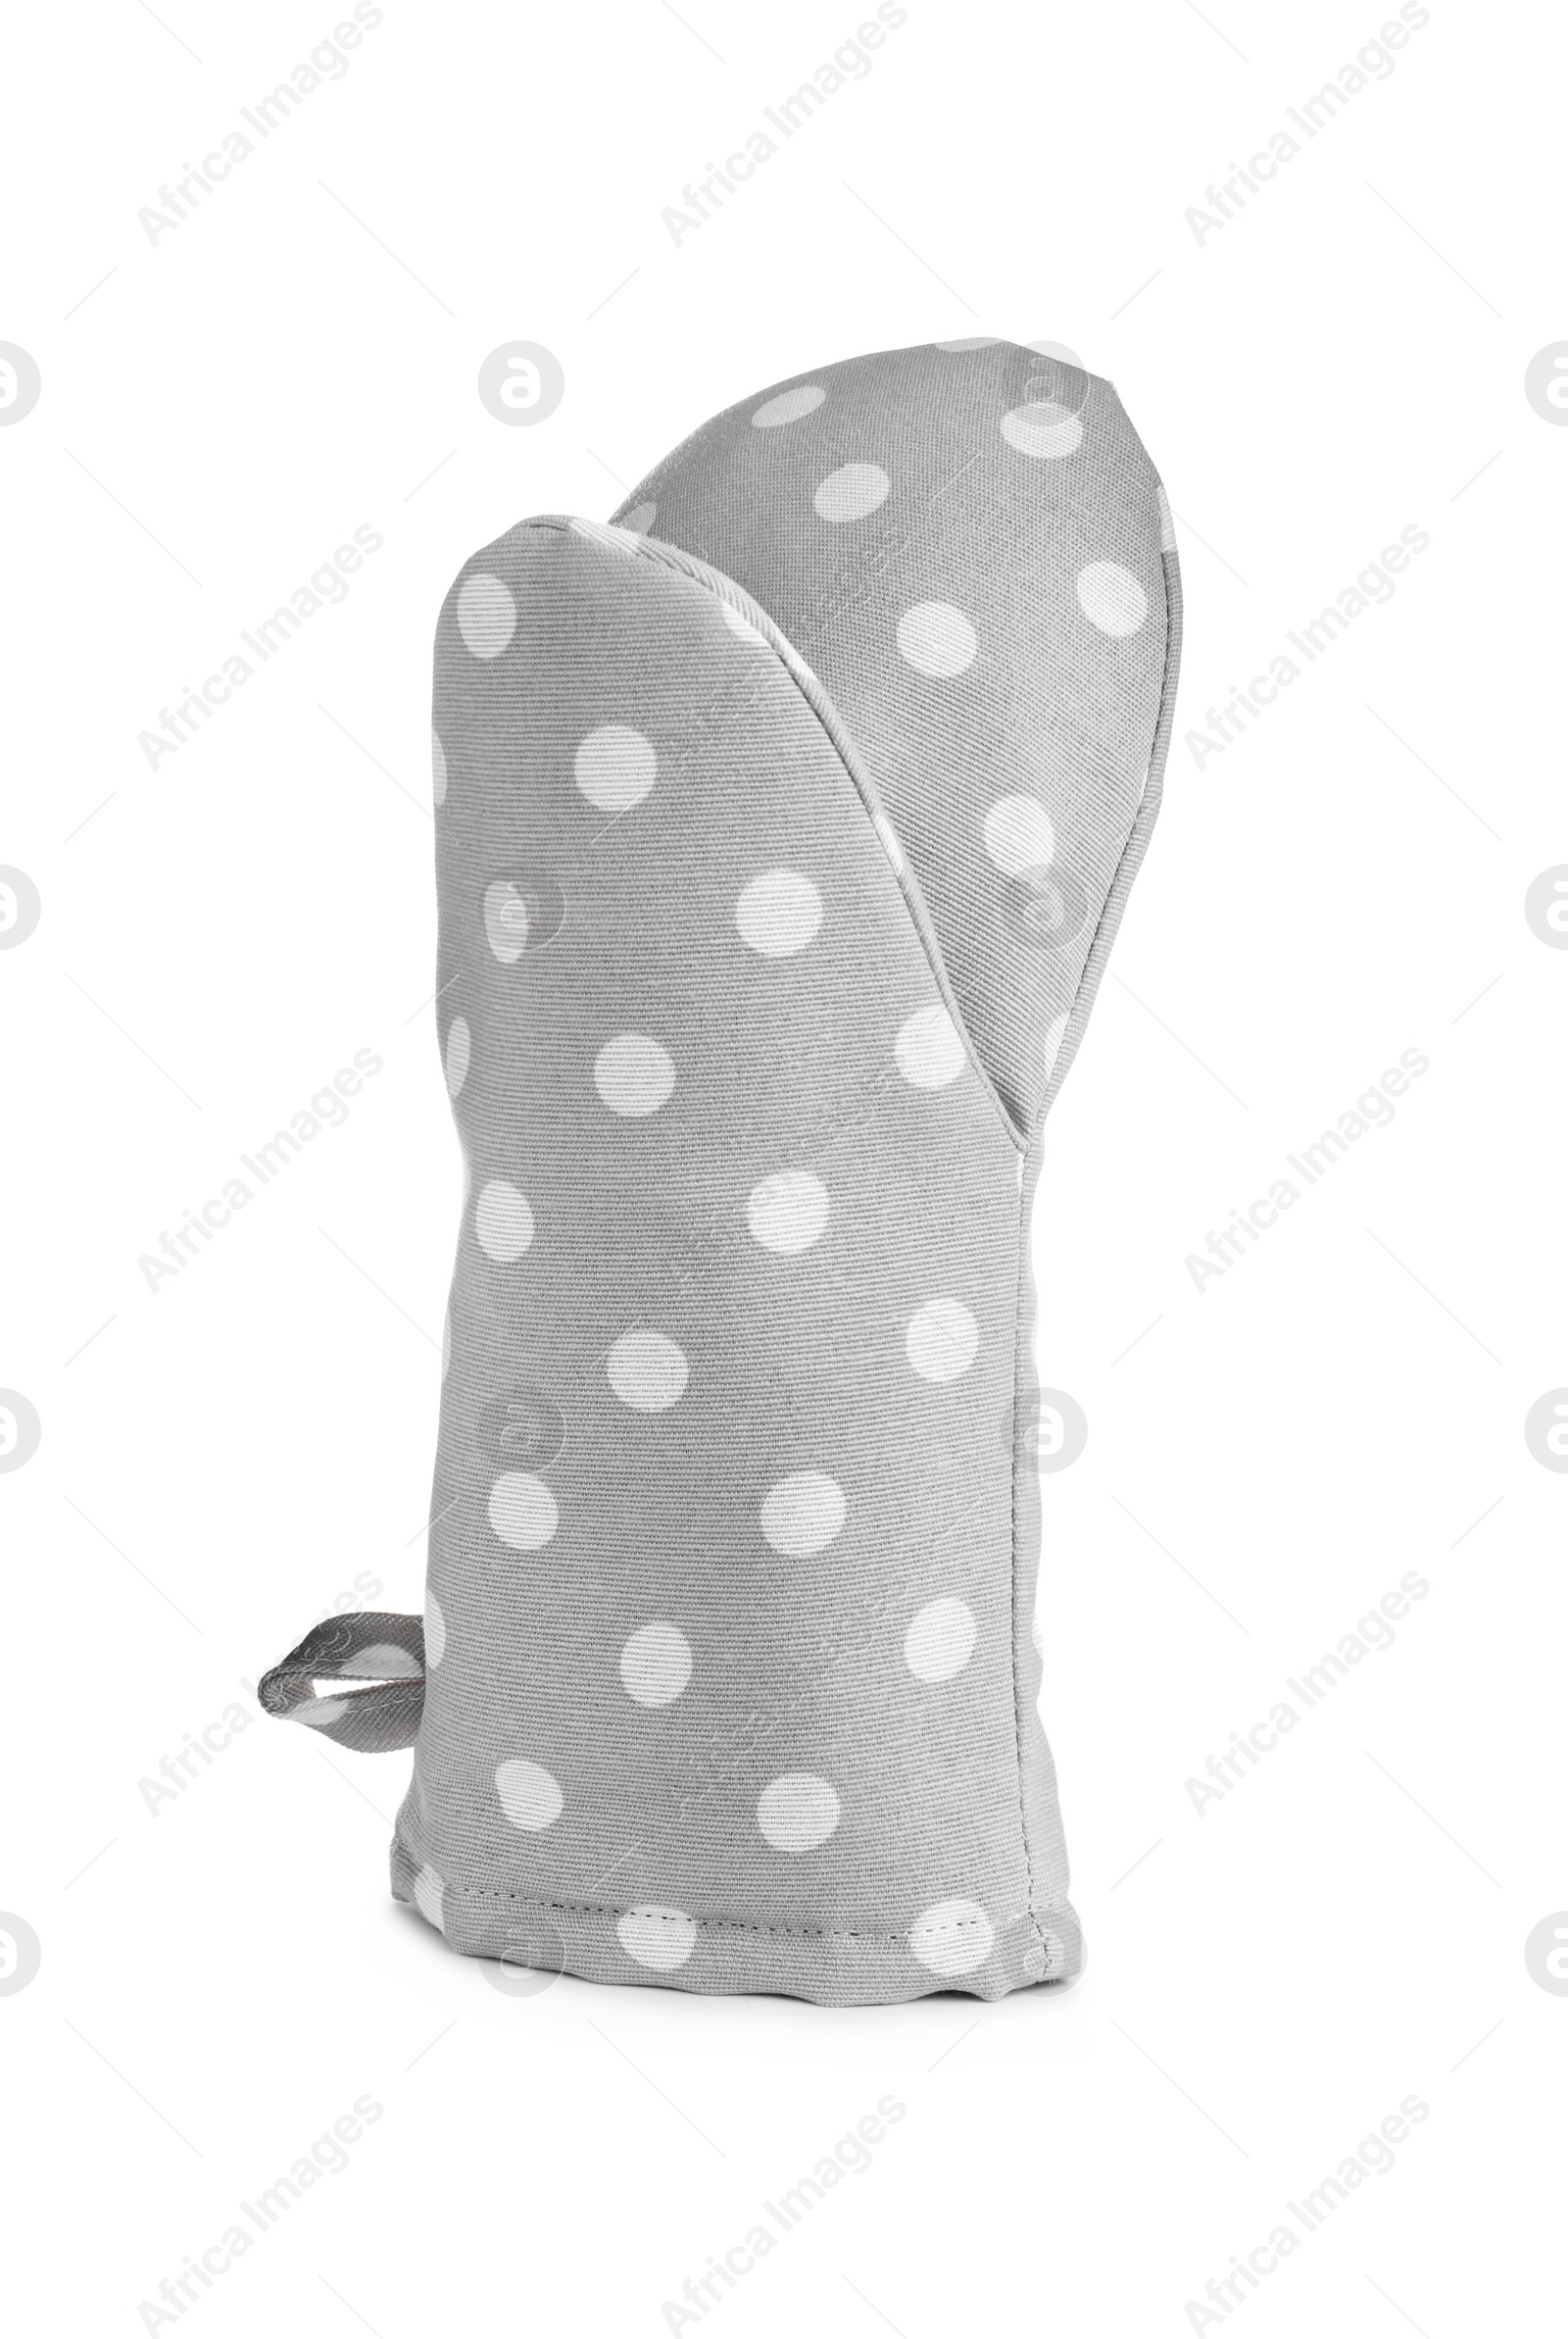 Photo of Oven glove for hot dishes isolated on white